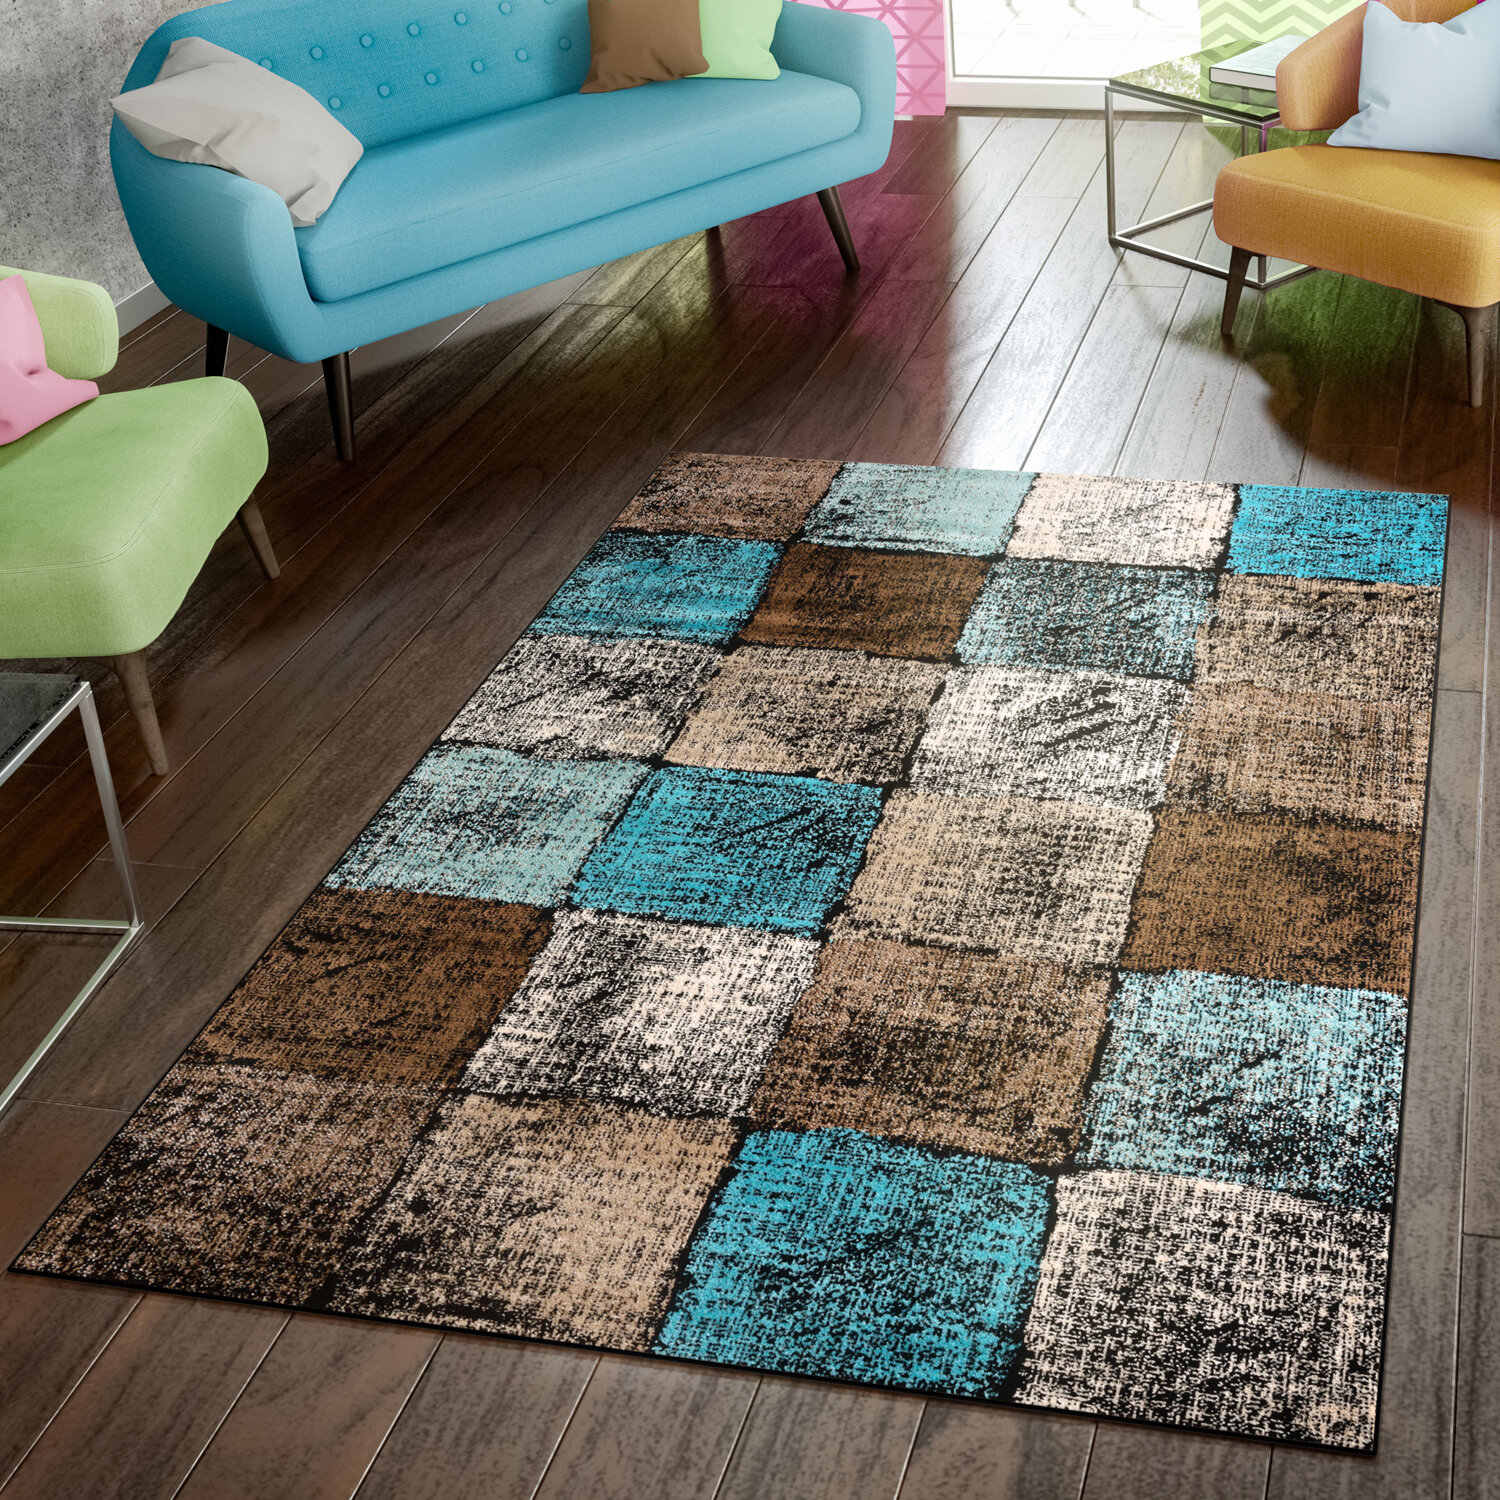 BlessLiving Abstract Area Rug Soft 3D Green Turquoise Teal and Yellow Floor Mat Modern Wave Reversible Large Carpet for Bedroom Kitchen Living Room 4' x 6' 